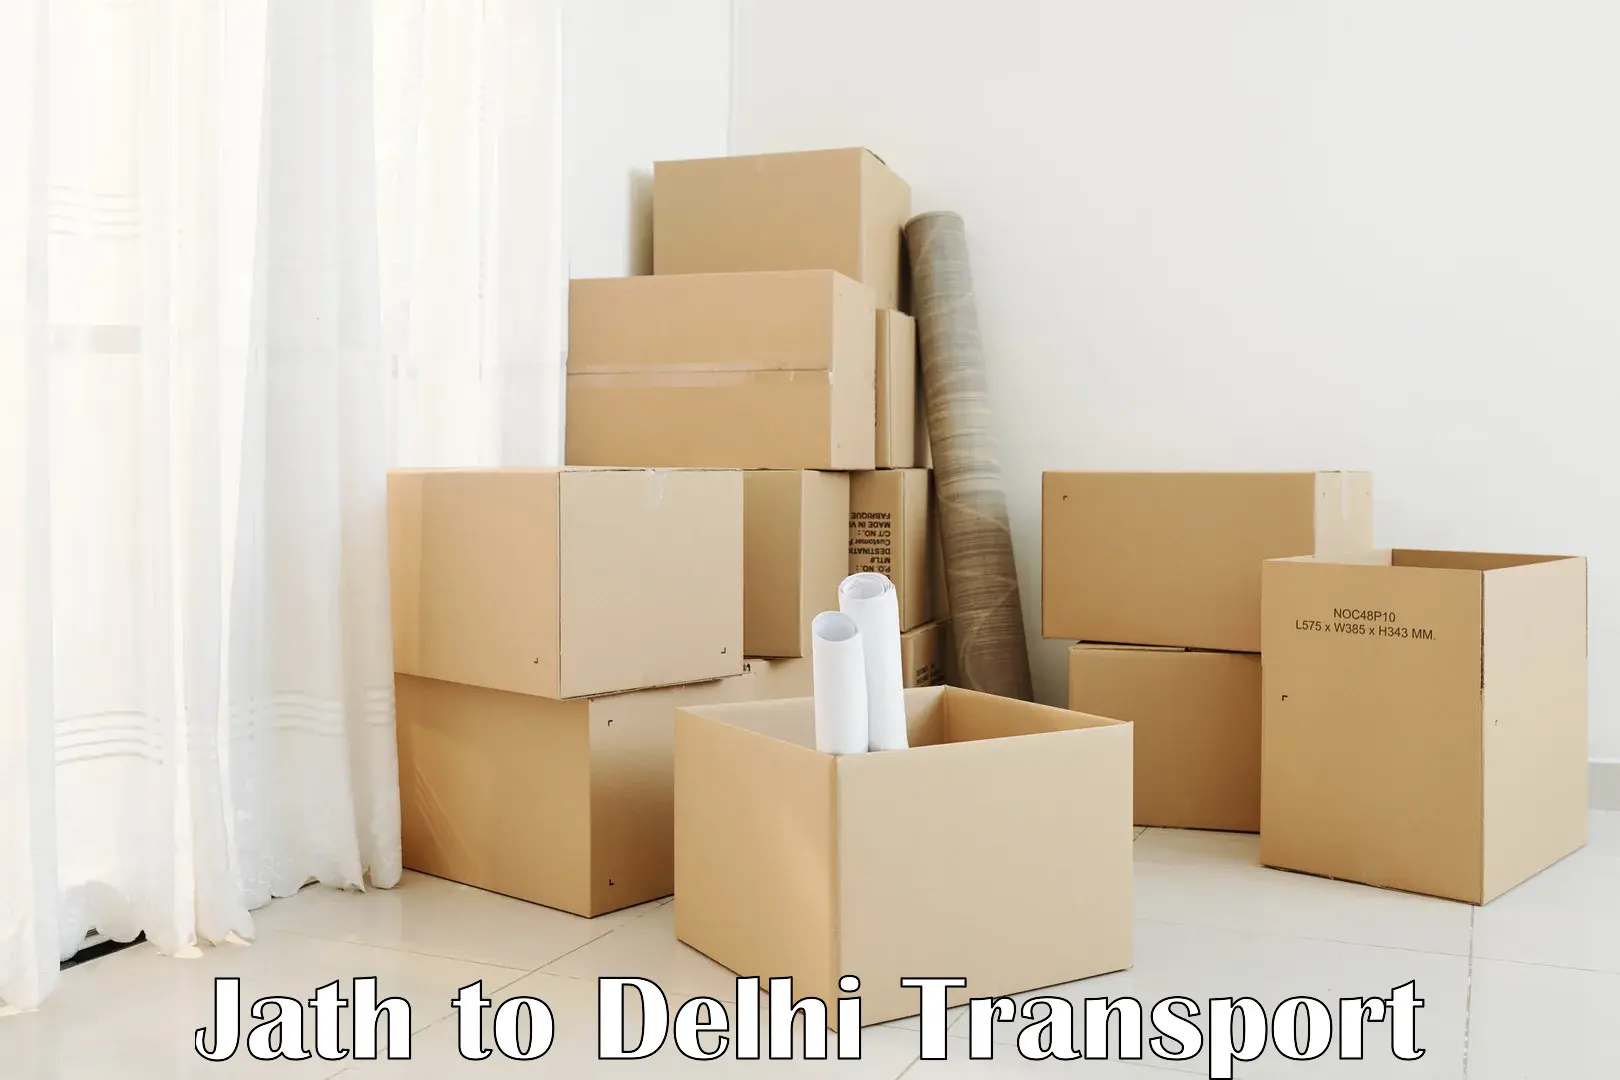 All India transport service Jath to NCR